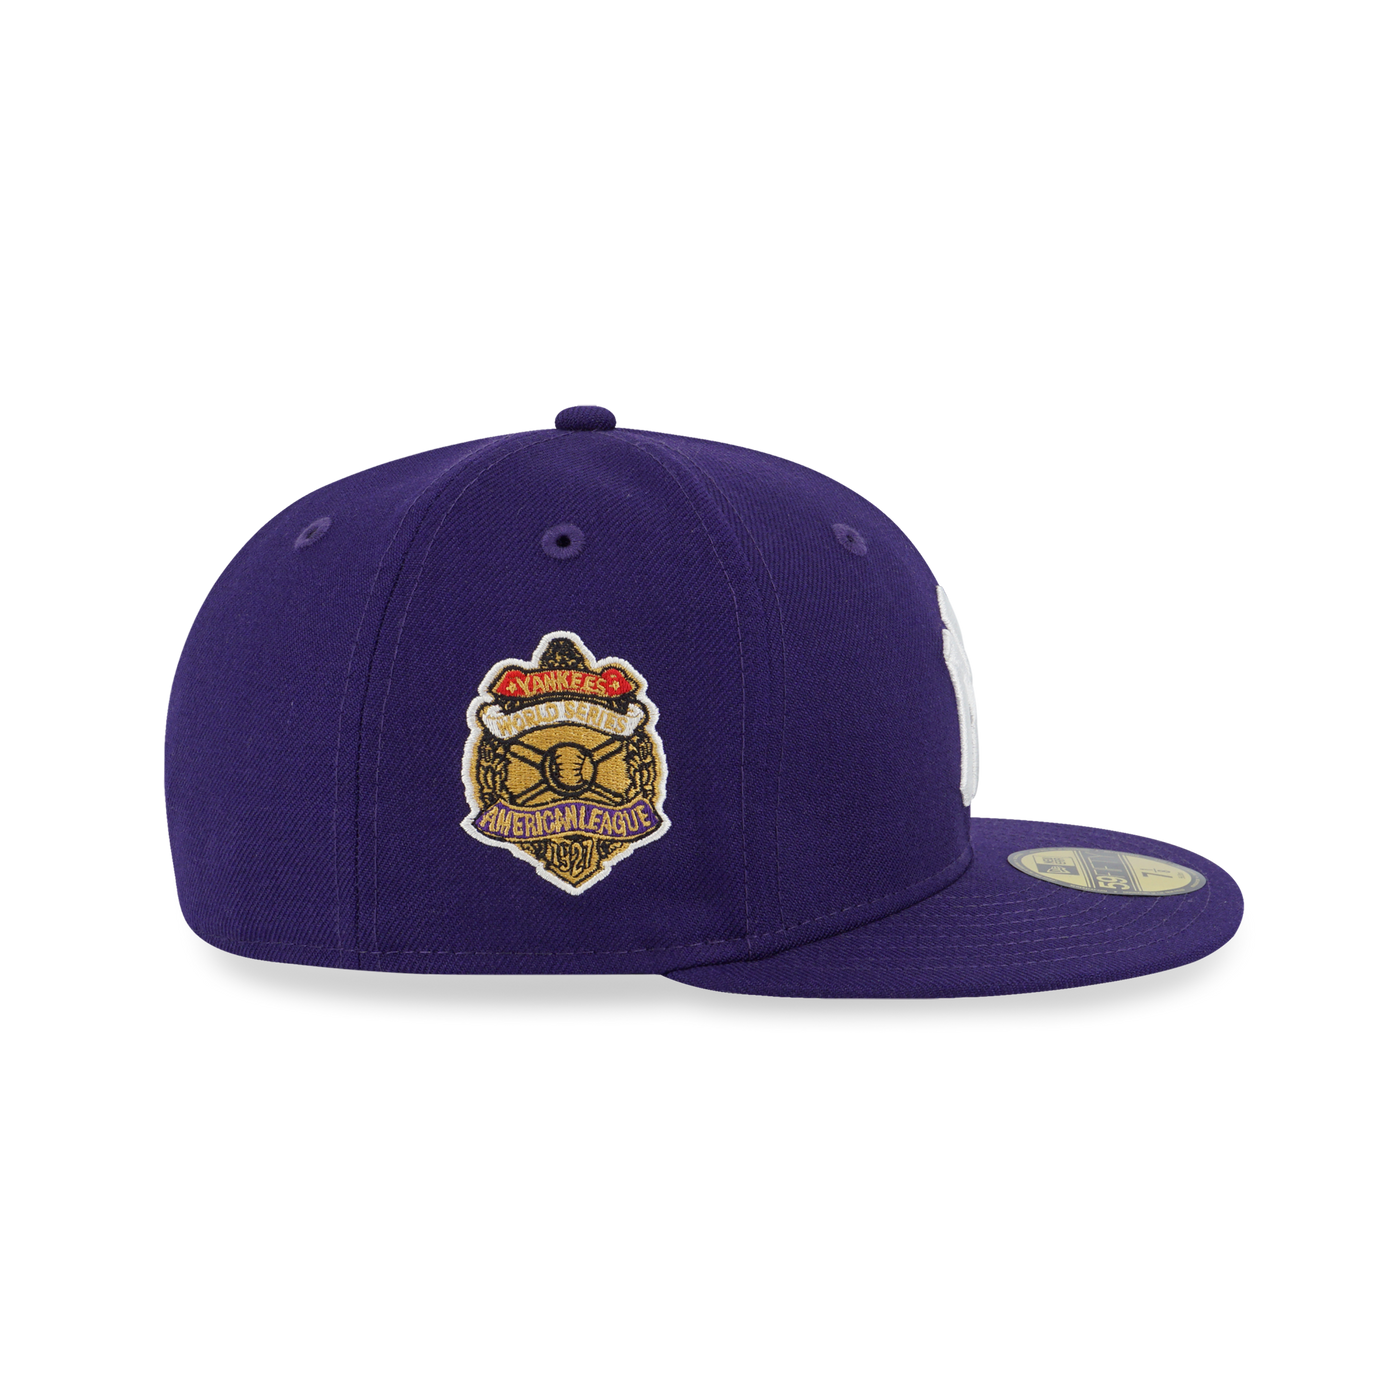 NEW YORK YANKEES COOPERSTOWN ROYAL PURPLE 59FIFTY CAP